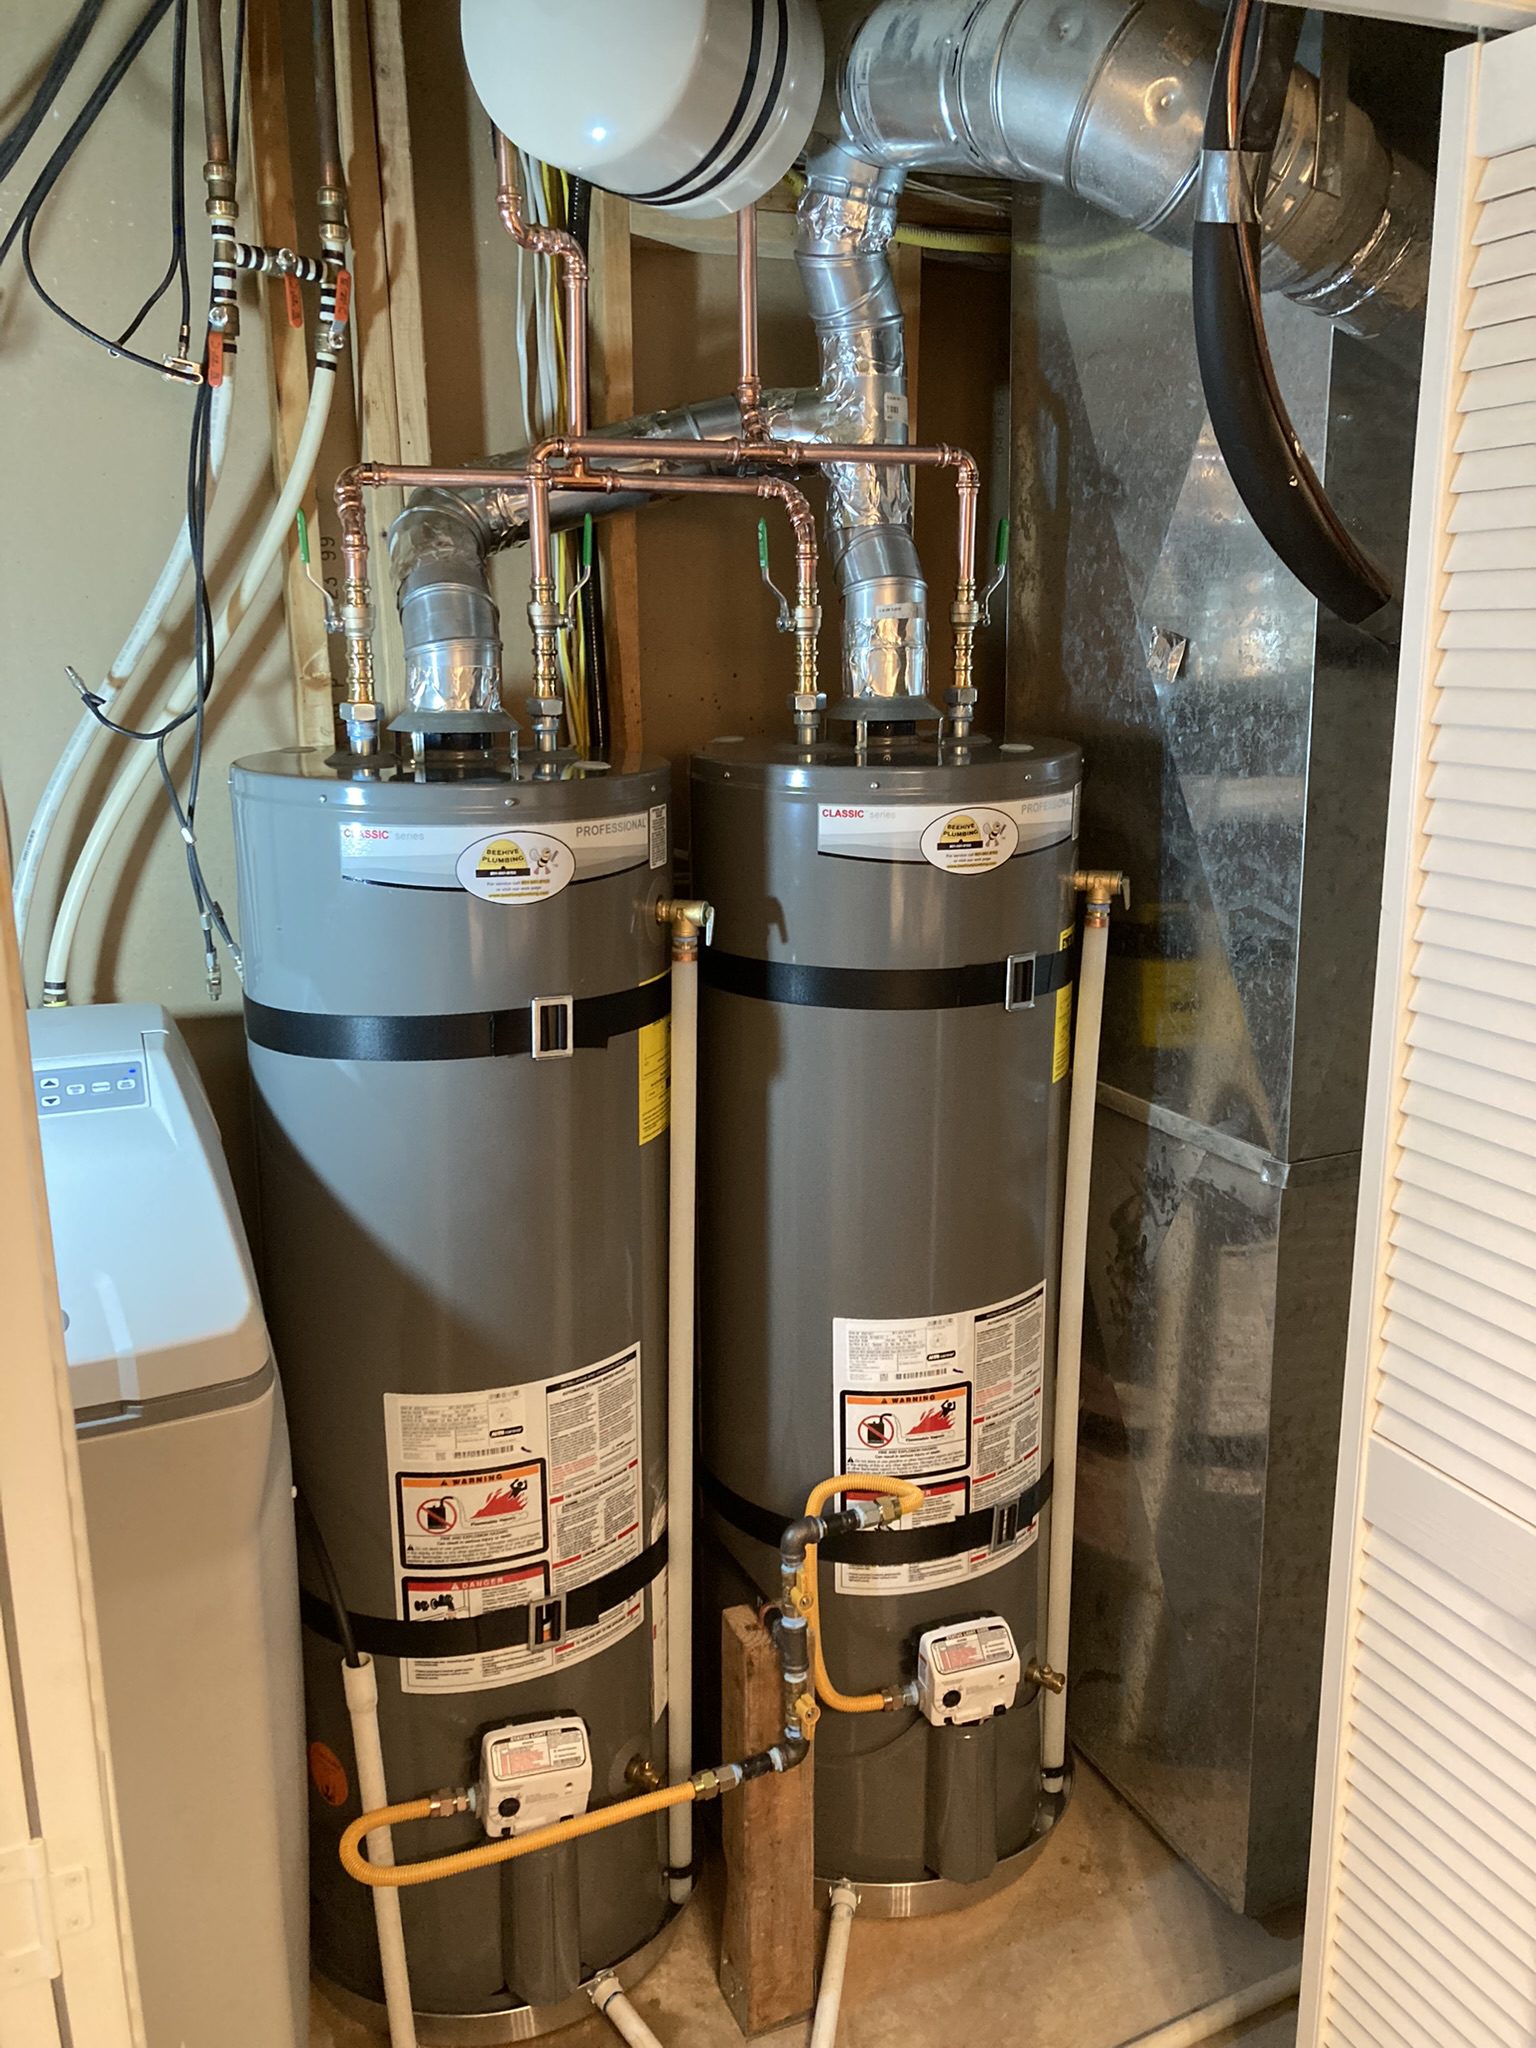 Your electric water heater is wasting your energy and money!